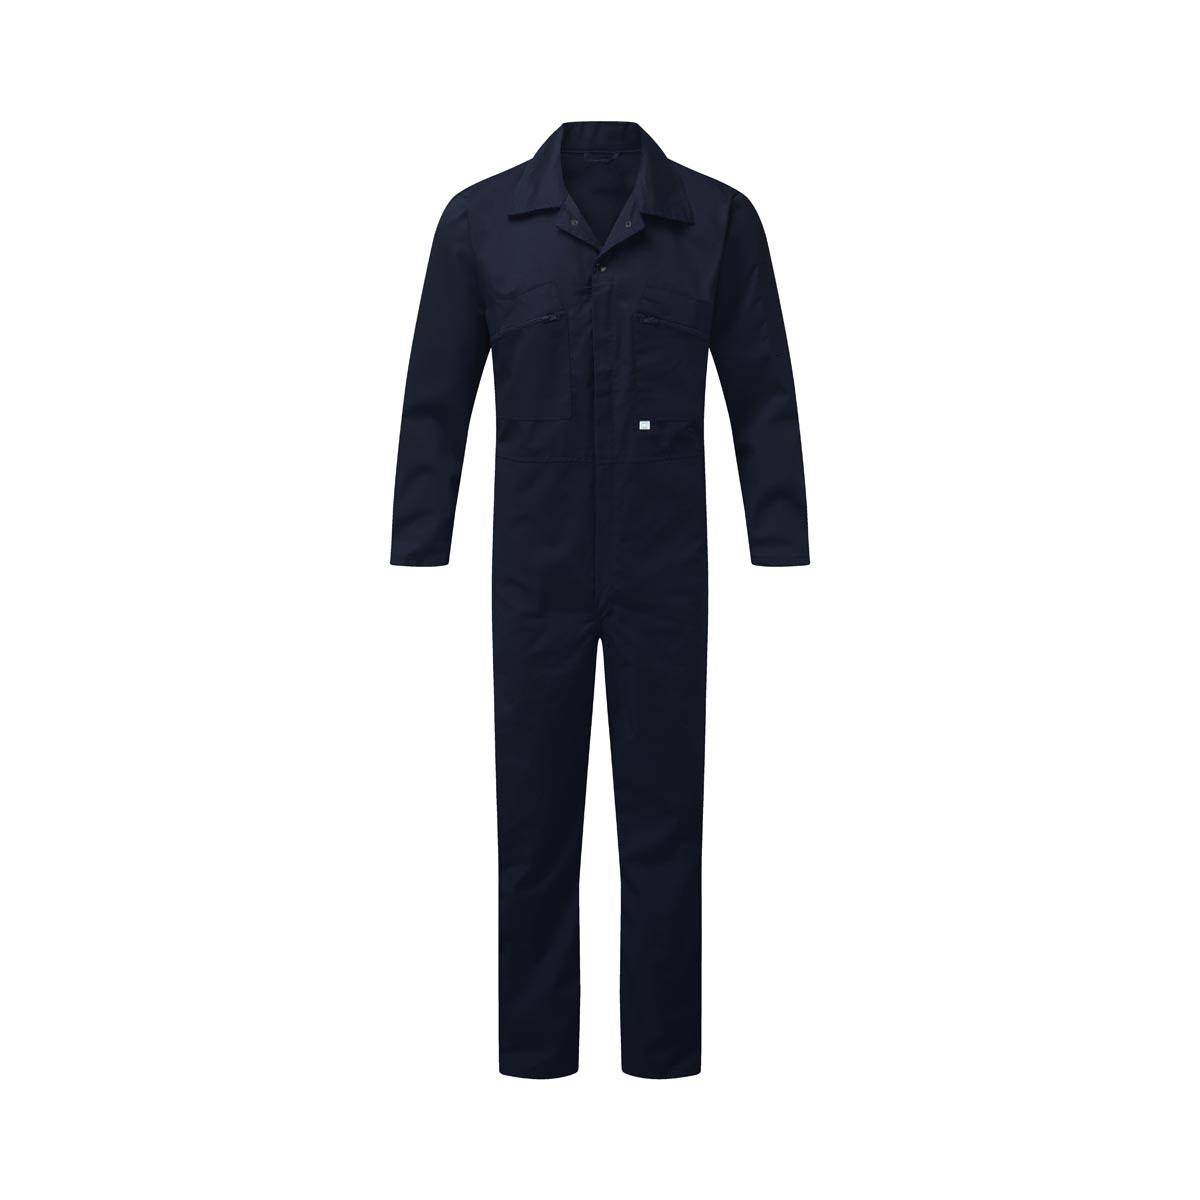 Fort 366-NVY-46 366 Zip Front Coverall Navy Blue - 46 | By Toolden